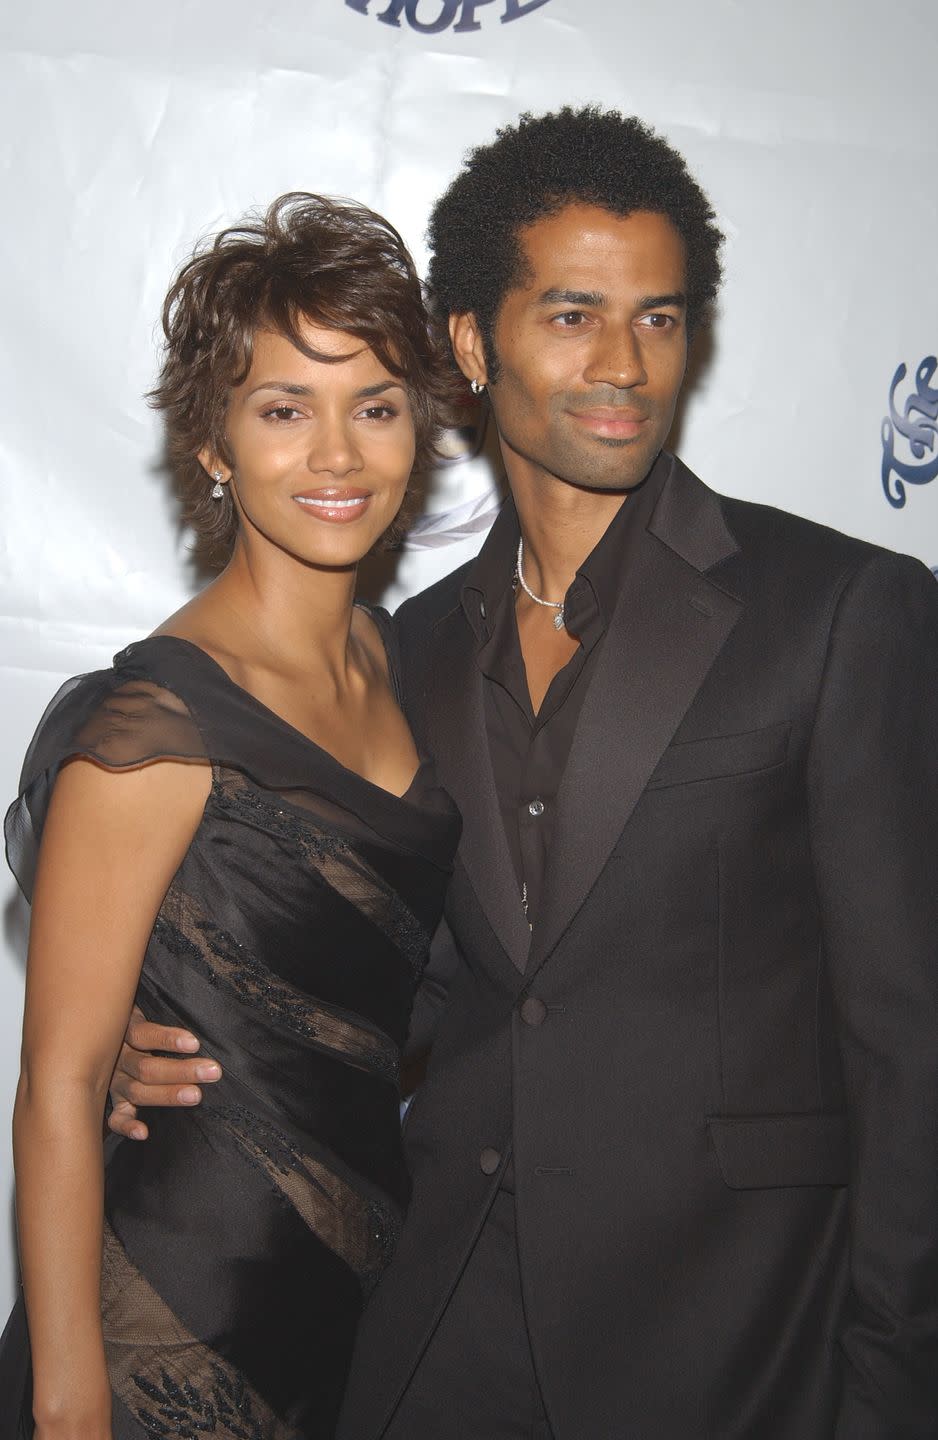 2002: Eric Benet Allegedly Cheats on Halle Berry